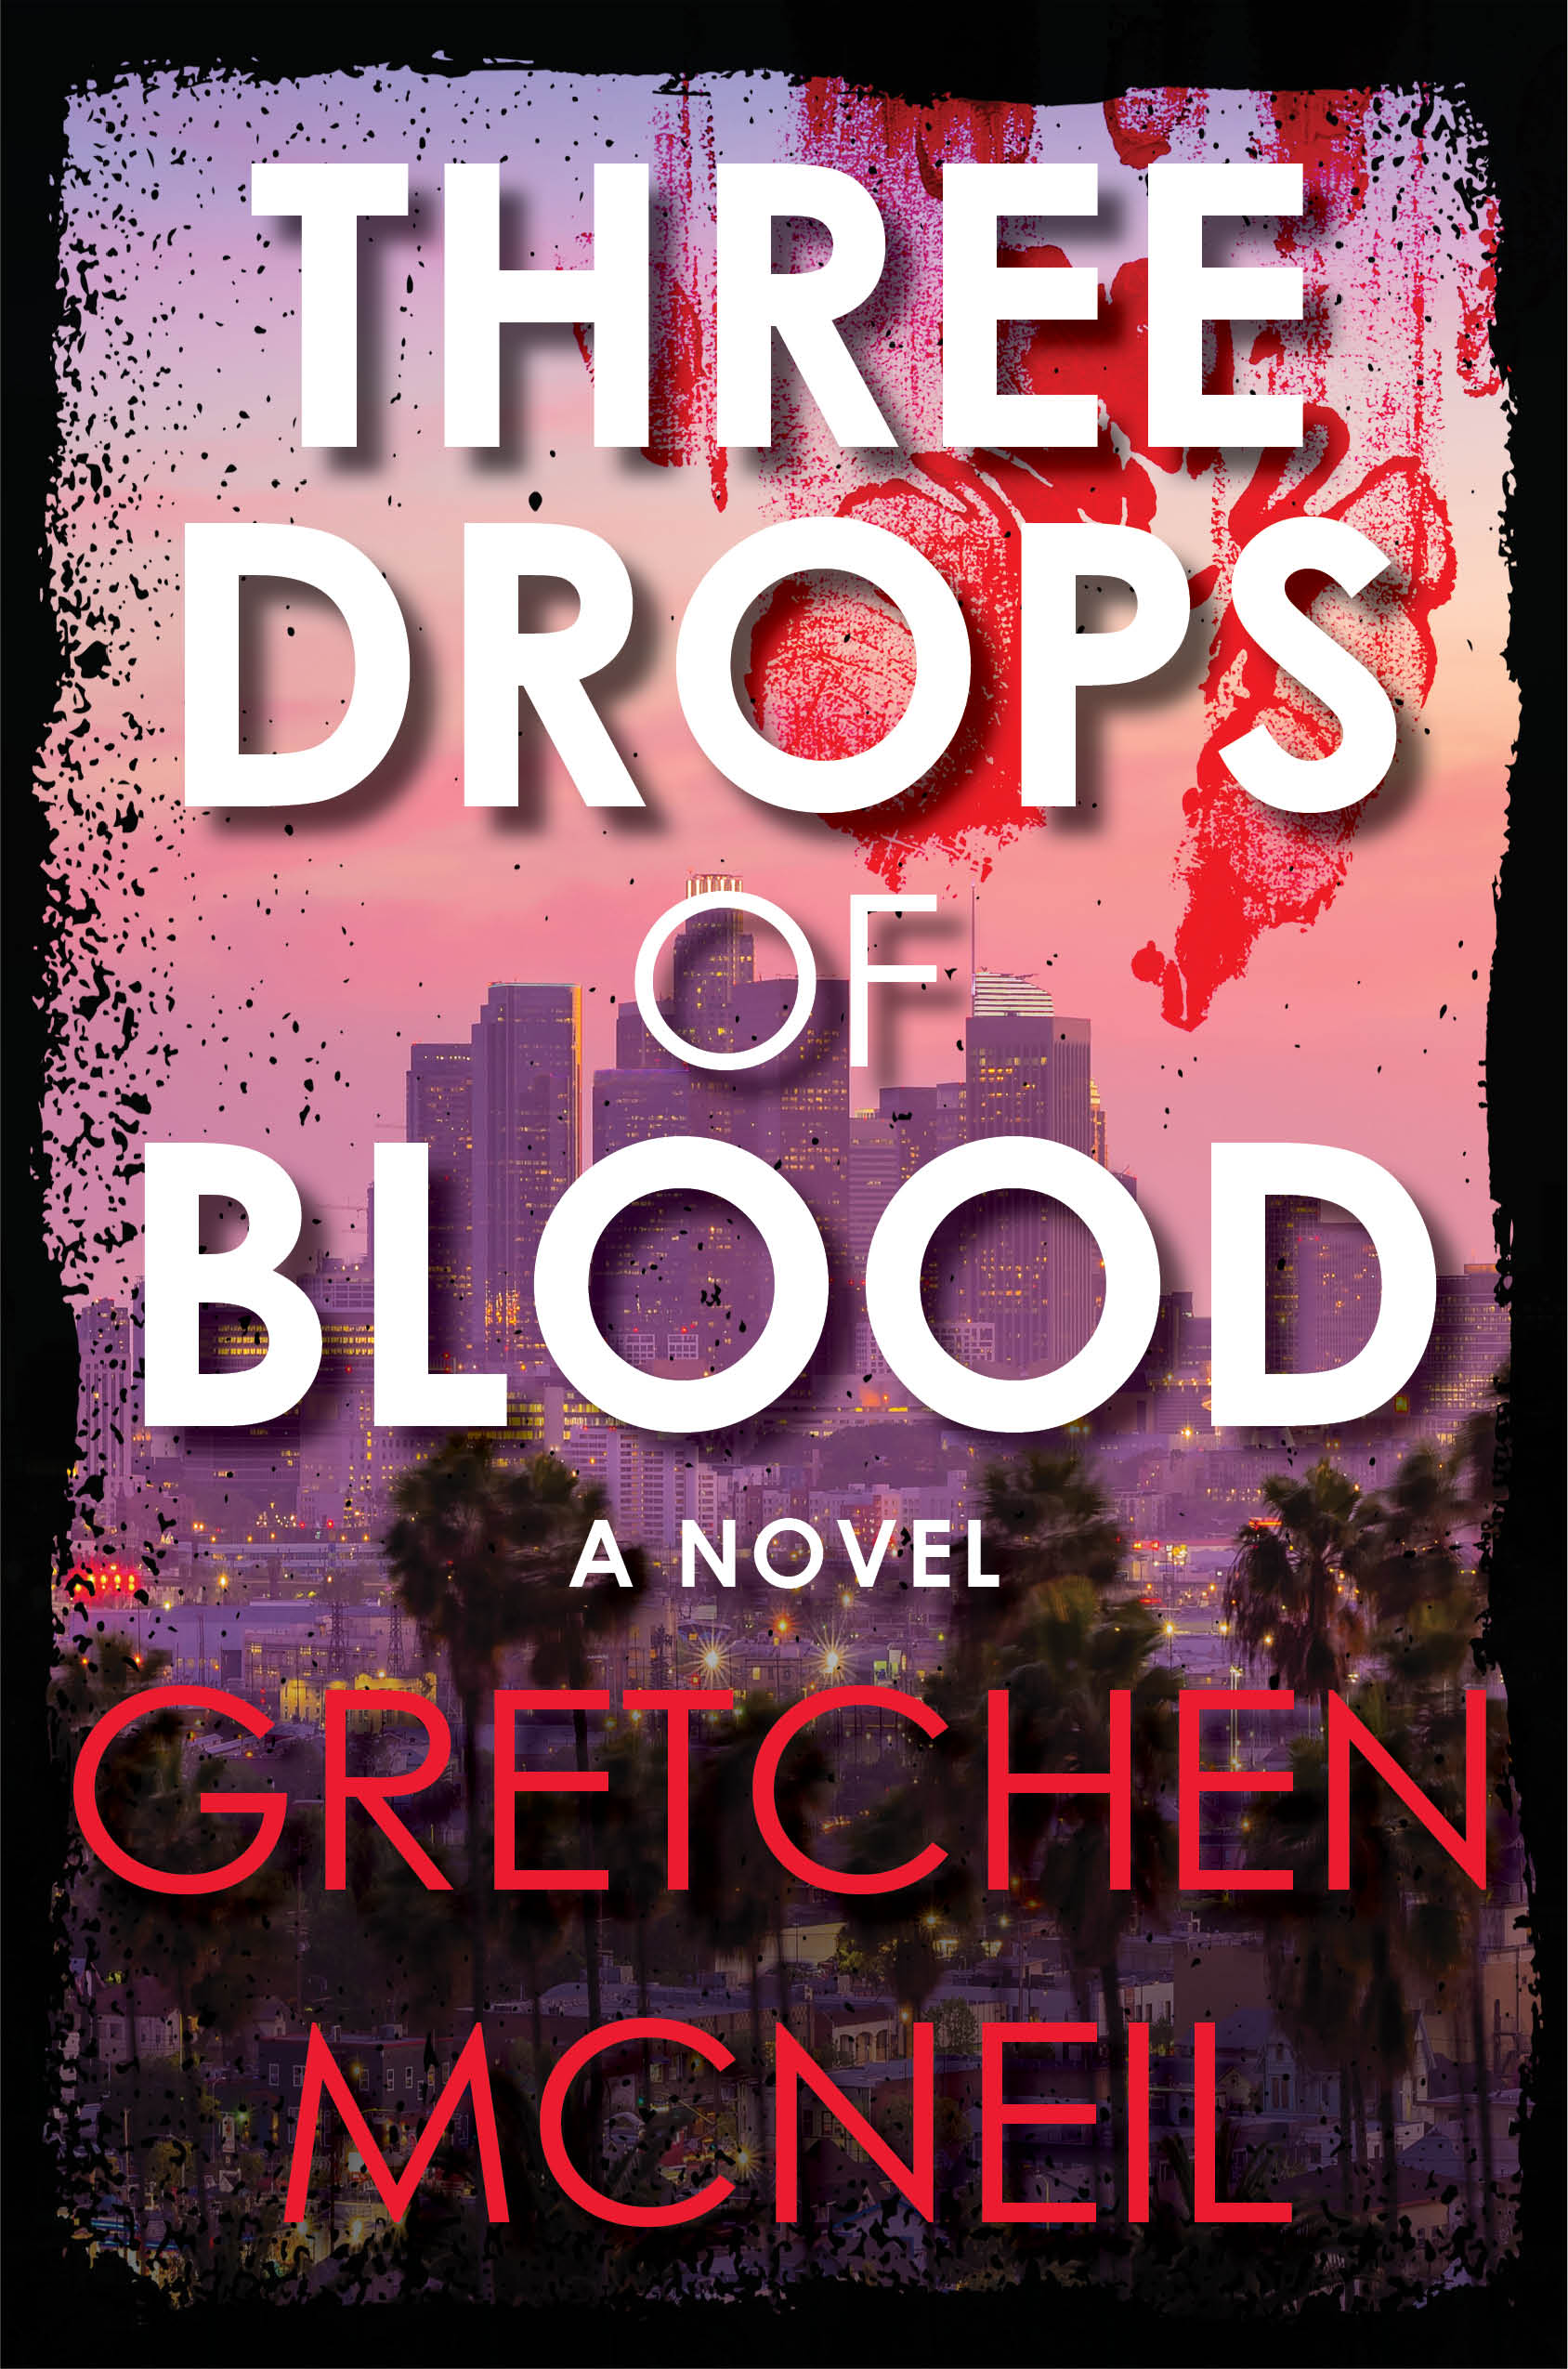 Three　by　Blood　Books　Drops　McNeil　of　Gretchen